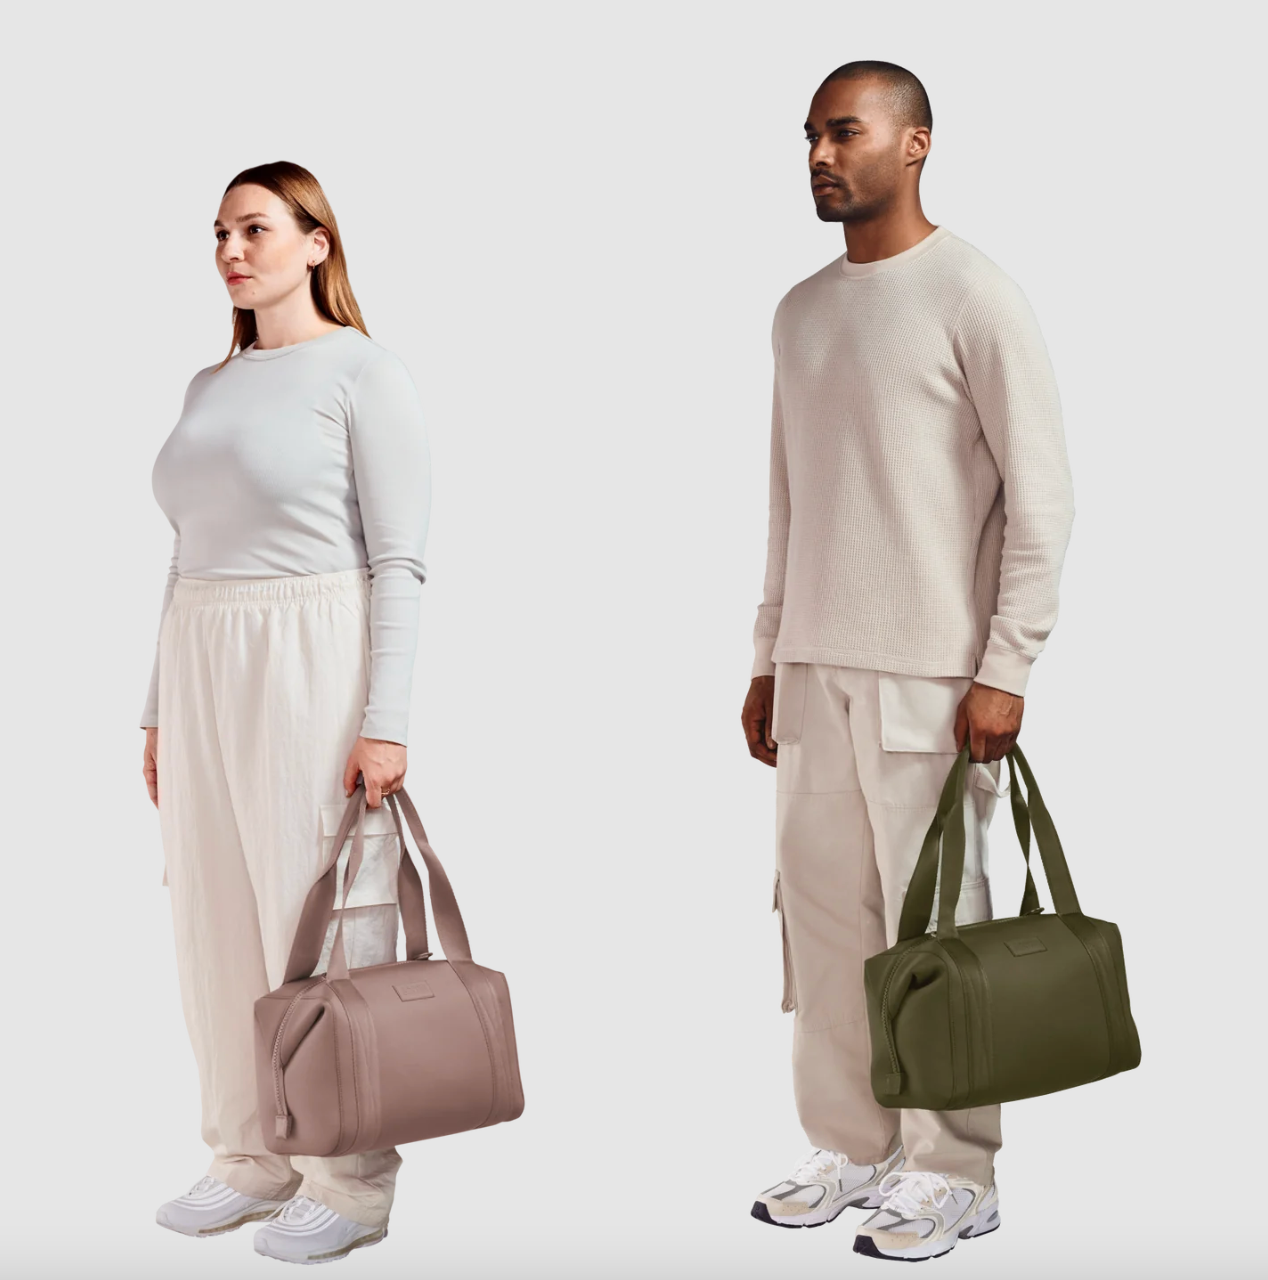 models holding the duffel in different colors